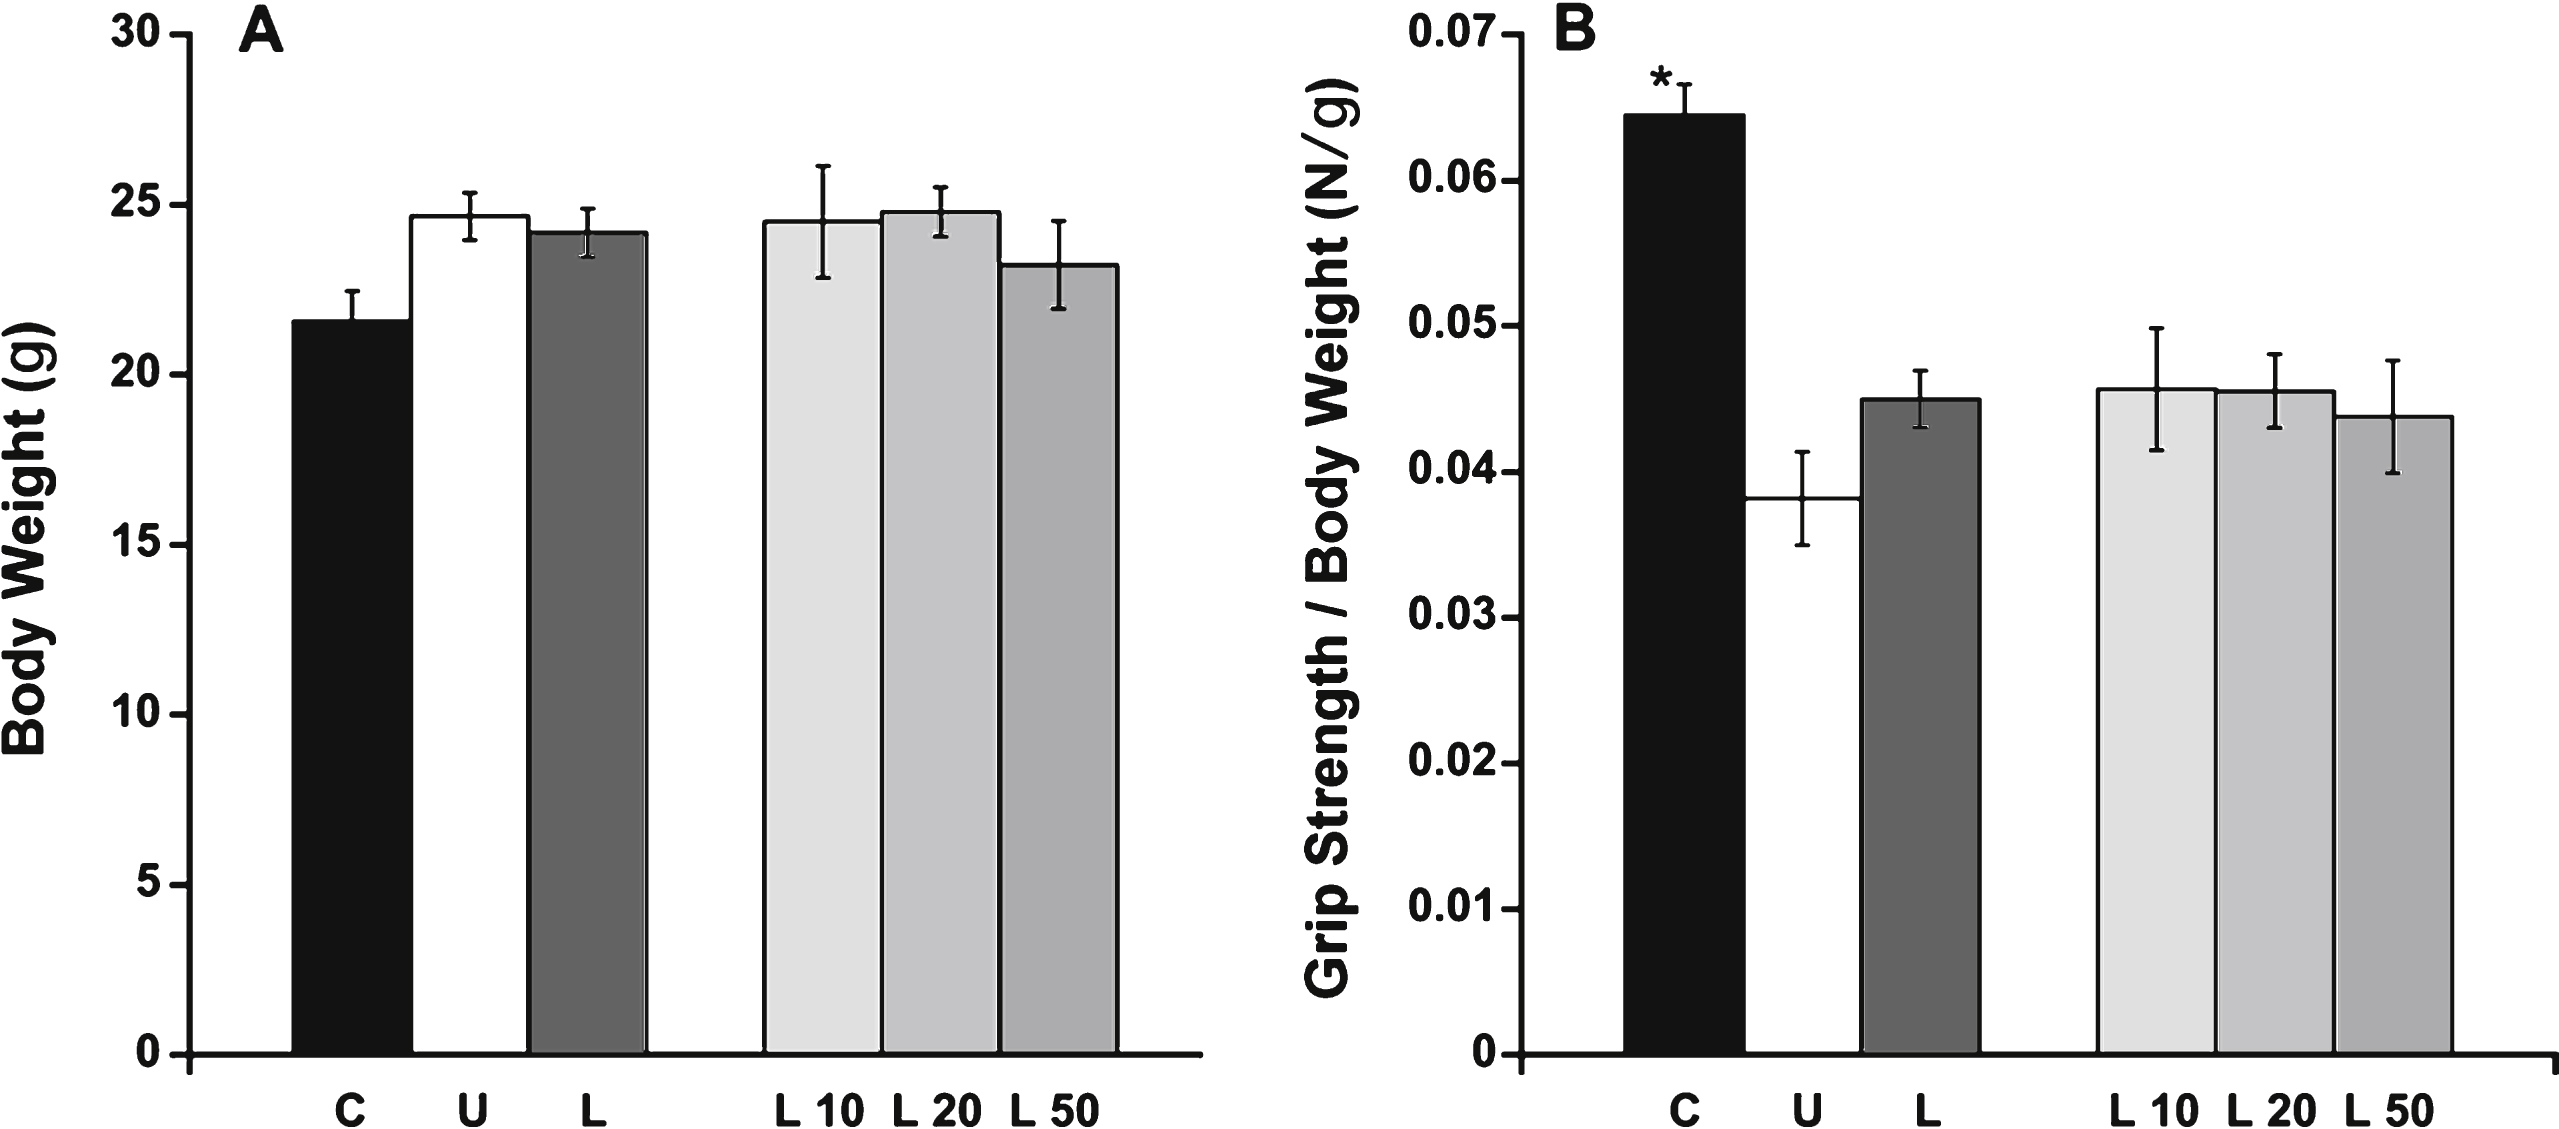 Body weight and grip strength analysis. A) Body weight was consistent among all treatment groups. B) Forelimb normalized grip strength was significantly higher in C57BL/10 mice compared to untreated het mice. C: C57BL/10 wild-type control mice (n = 10); U: untreated het mice (n = 10); L: all 3 groups of lisinopril-treated het mice (n = 18); and L10, L20, L50 = groups of het mice treated with lisinopril at 3 different (10, 20, and 50 mg/kg × day) dosages (n = 6 per group). Data are shown as means  ±  SEM.  *ANOVA followed by a Dunnett post-hoc test indicated a significantly higher value compared to the untreated het group, P≤0.0001.